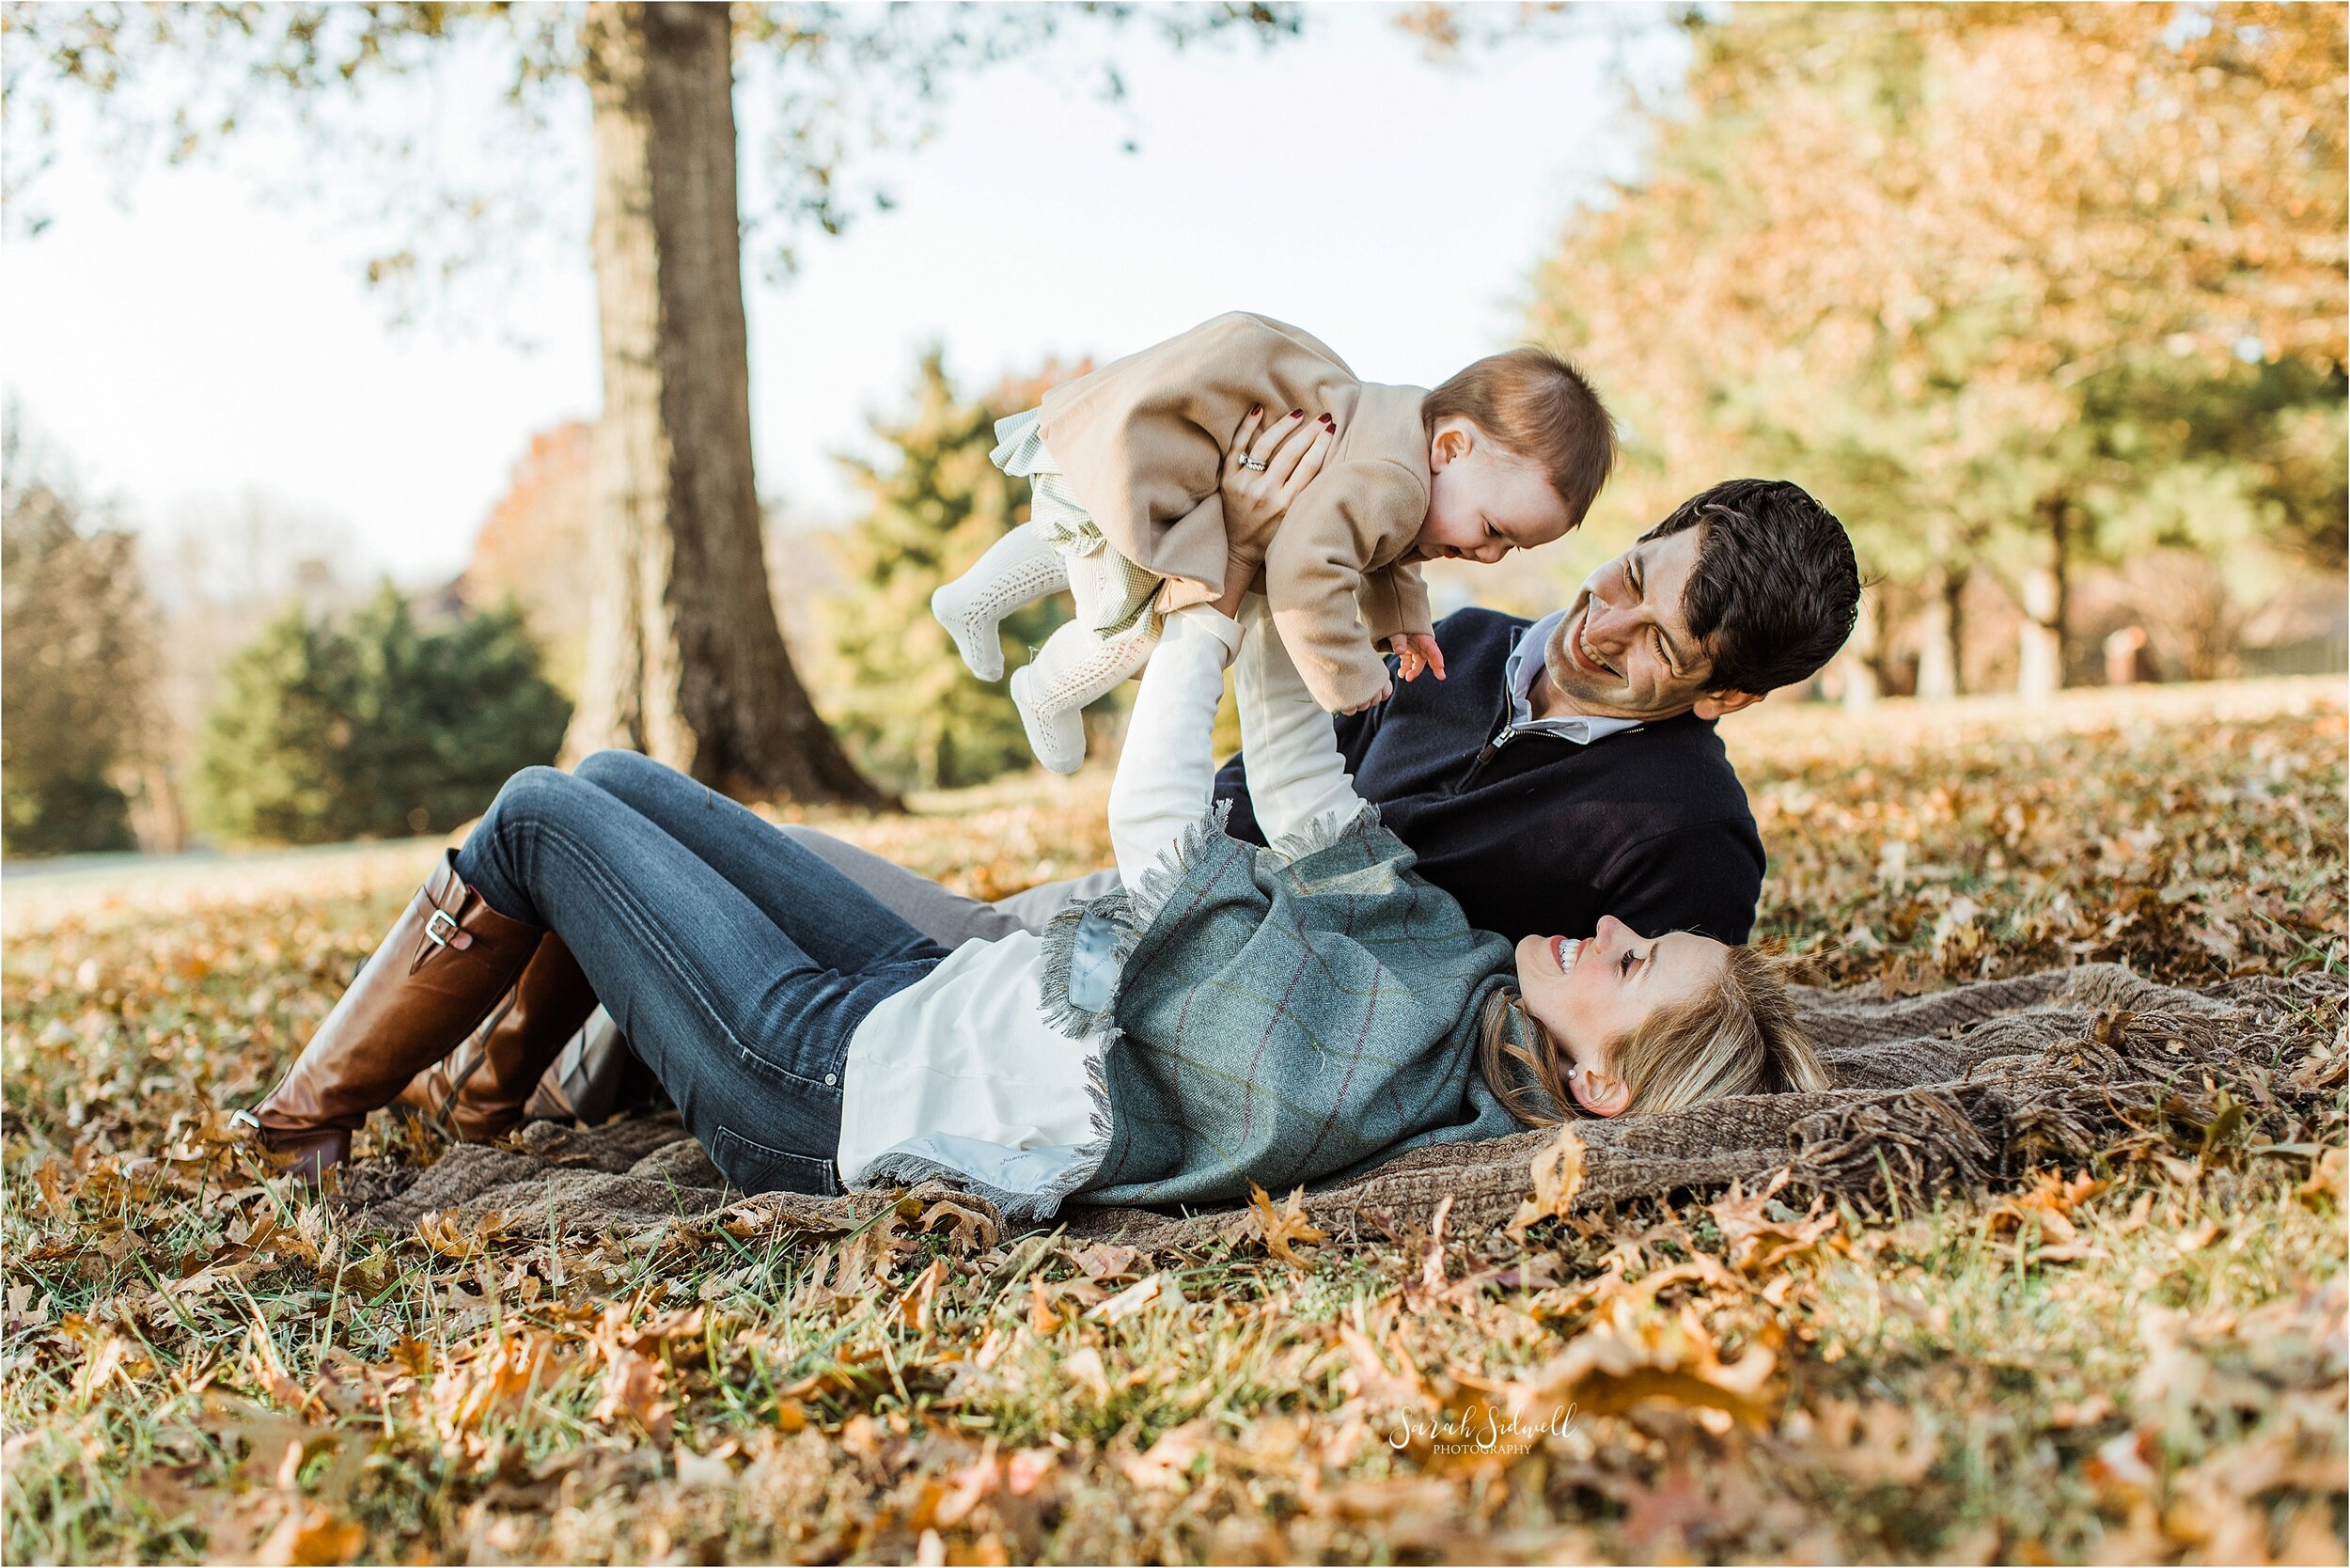 Outdoor Baby Milestone Session | Franklin, Tennessee